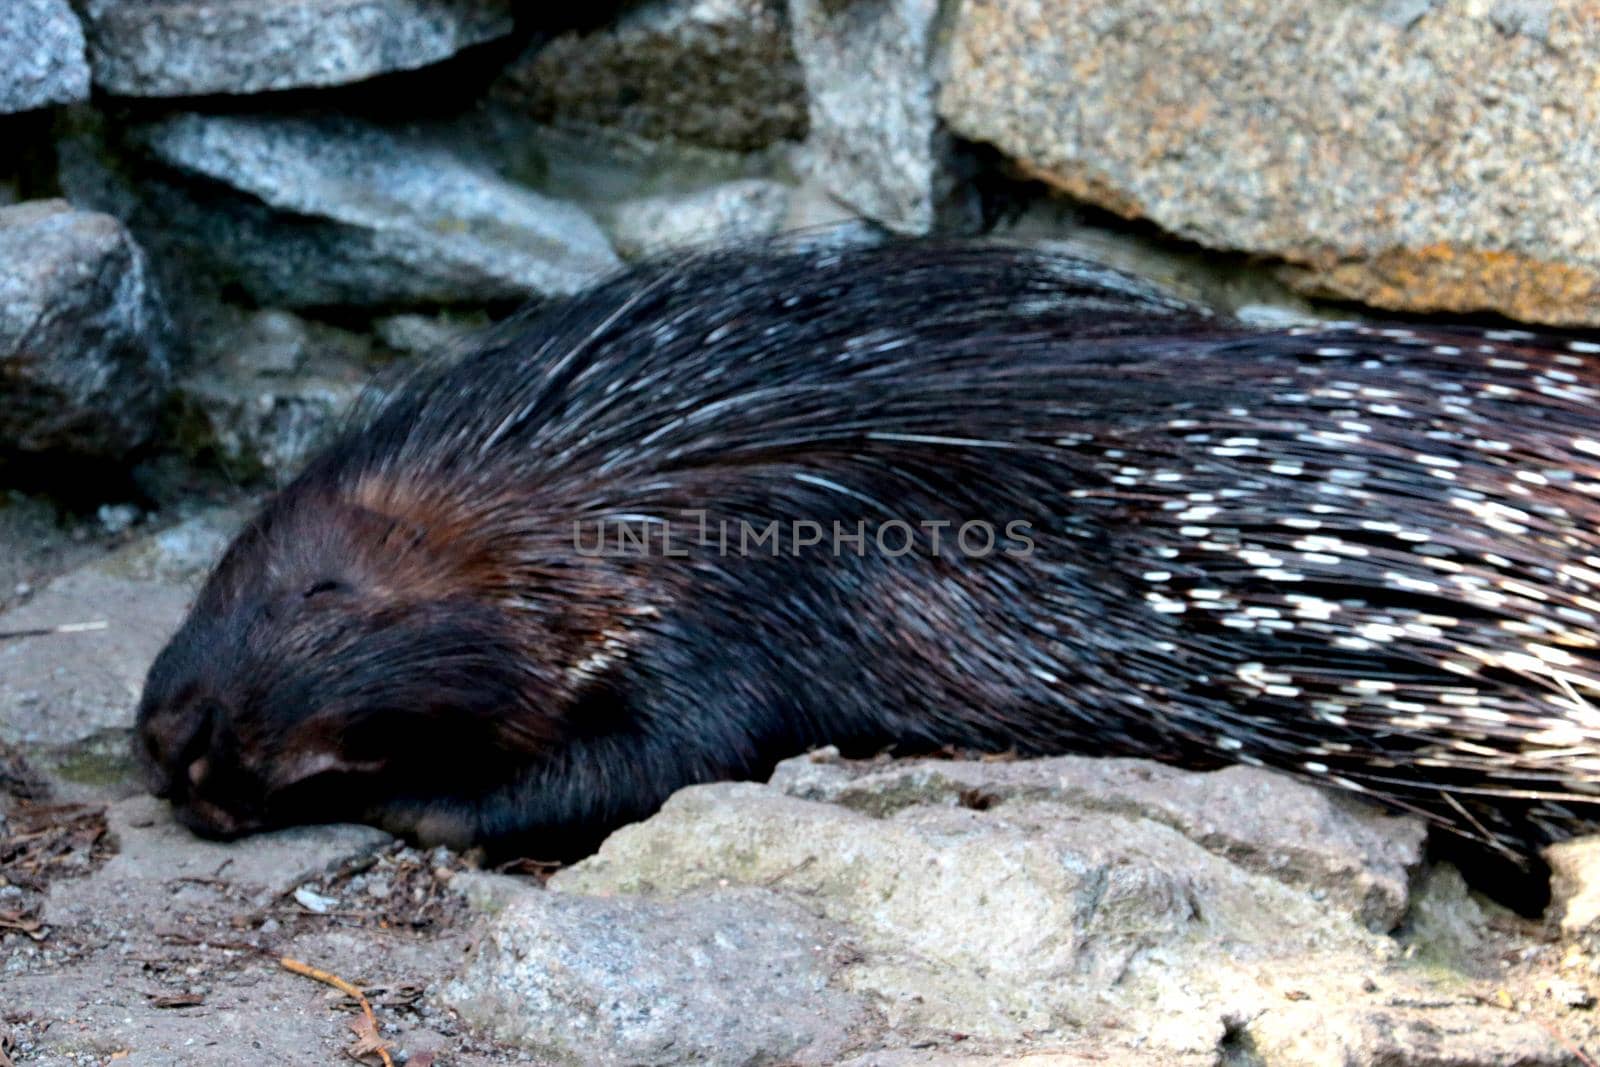 A porcupine is a large rodent with sharp spines or needles that protect them from predators. by kip02kas